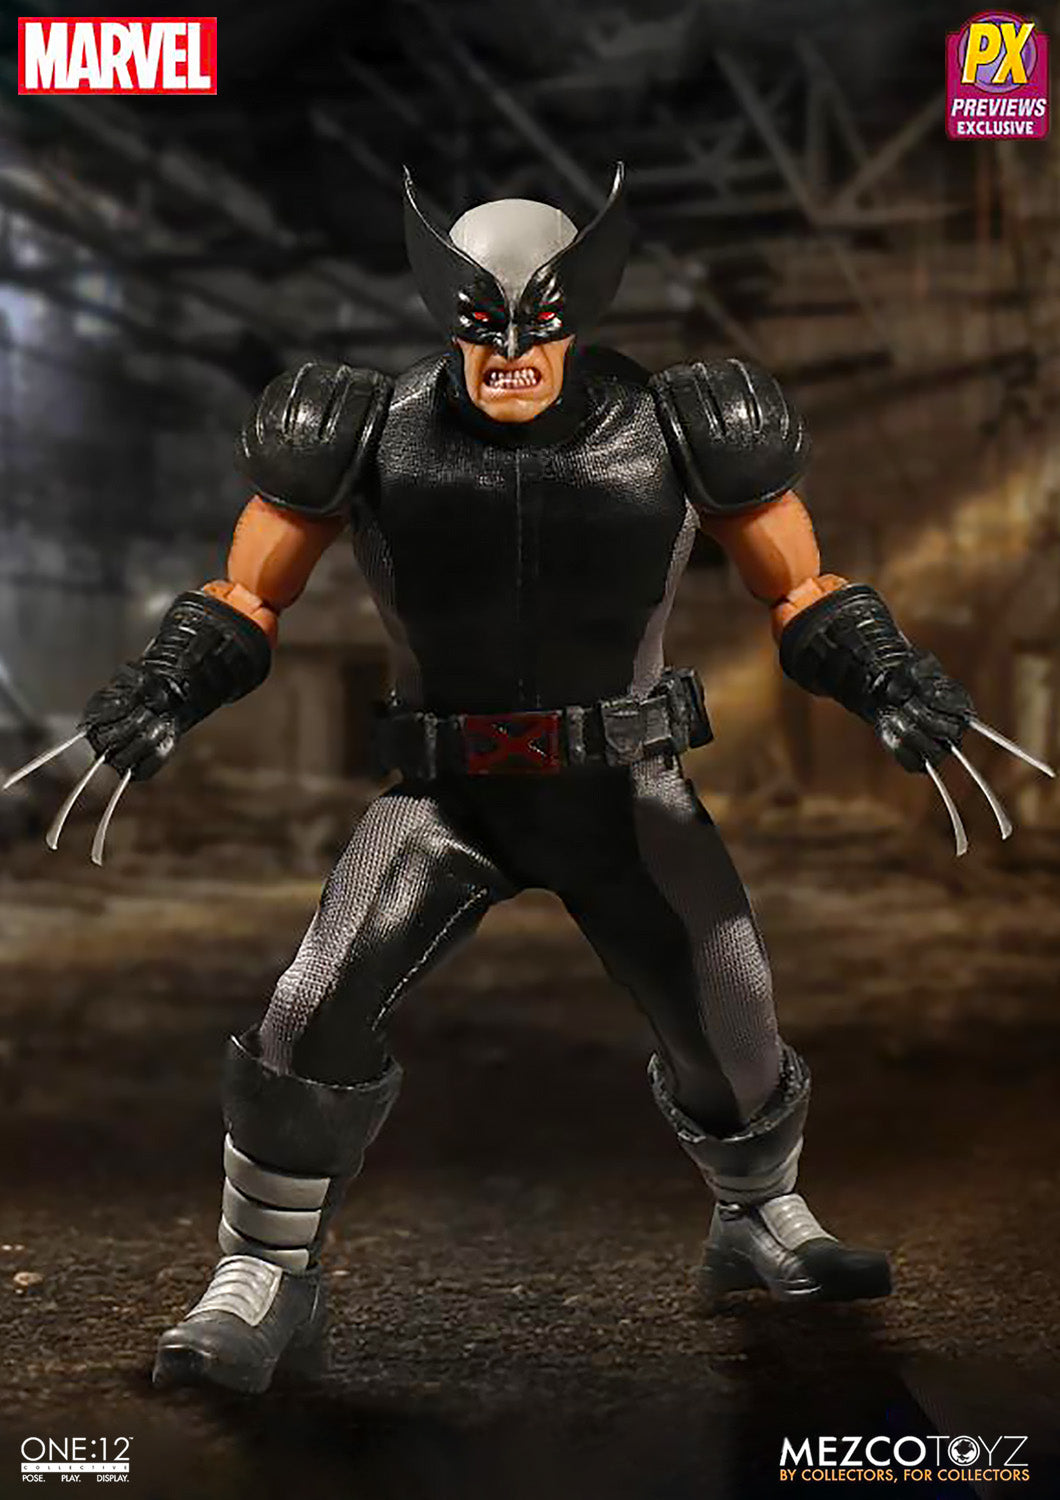 MEZCO WOLVERINE (PX) PREVIEWS EXCLUSIVE 1/12 SCALE - 76532 - Anotoys Collectibles